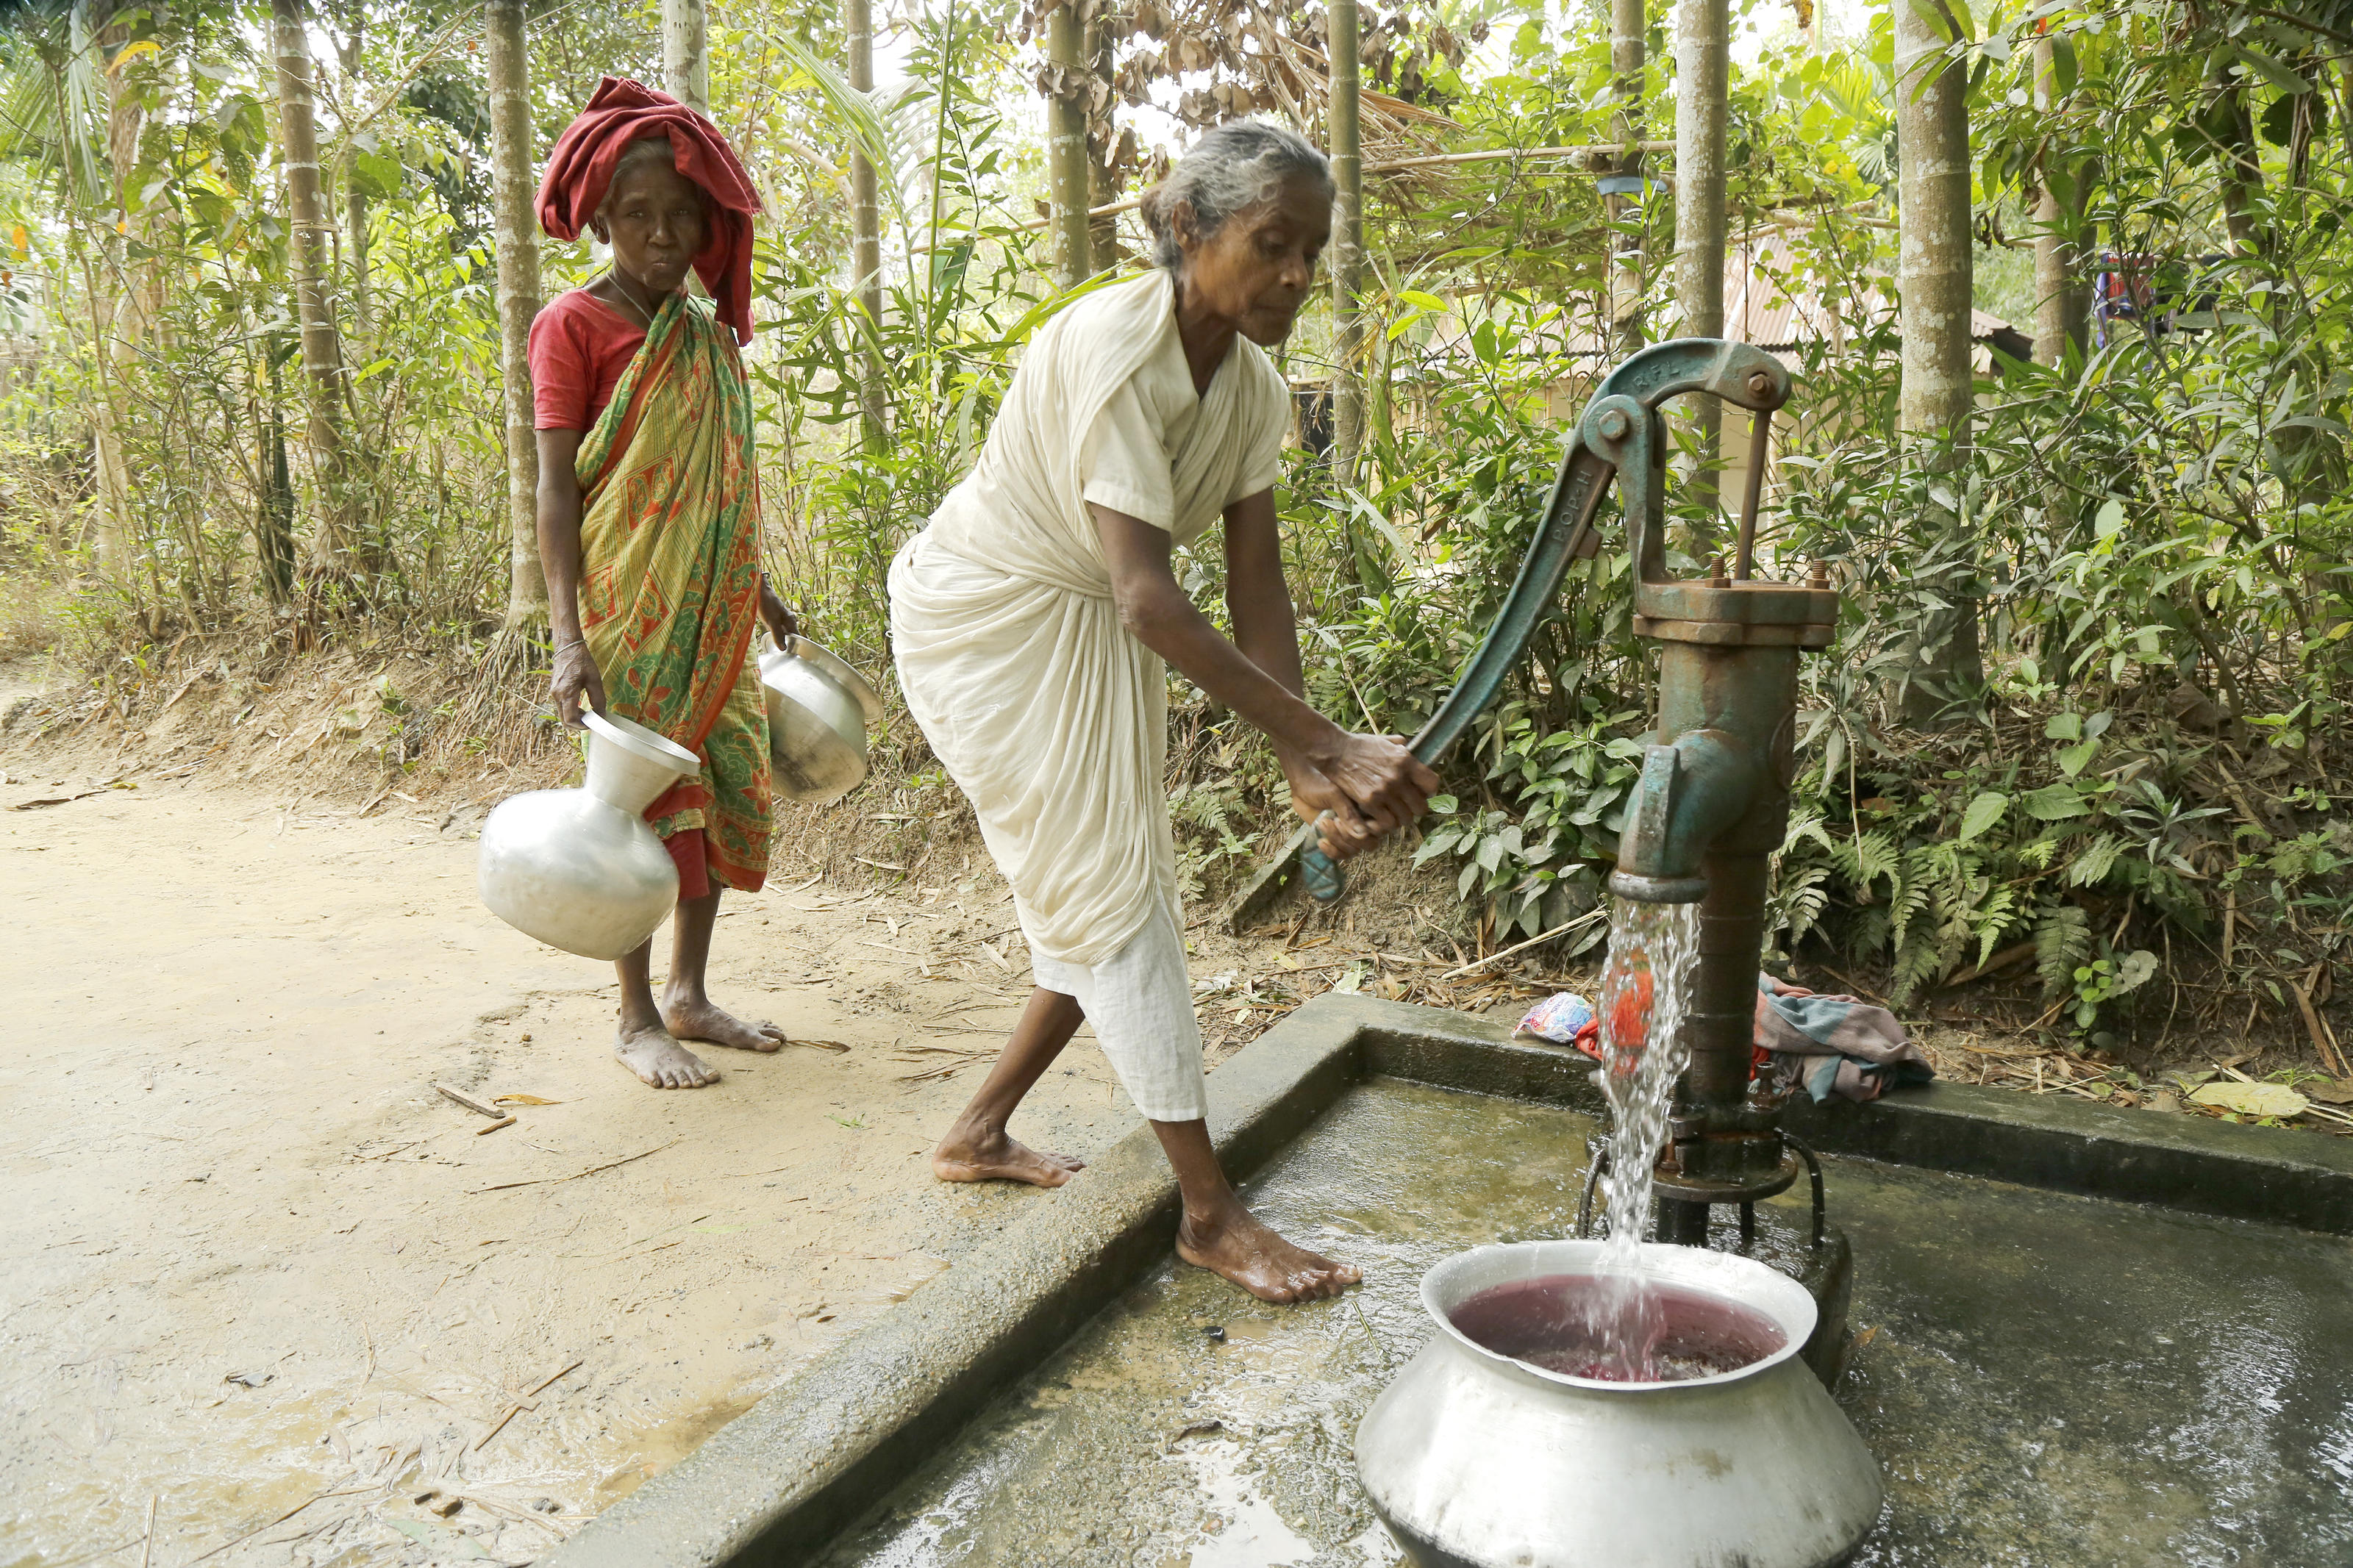 Handwashing during the COVID-19 pandemic is difficult for many living in rural communities but the WaterAid Bangladesh team introduced a manual of easy-to-use, handwashing devices designed to overcome challenges of affordability and accessibility to inclu